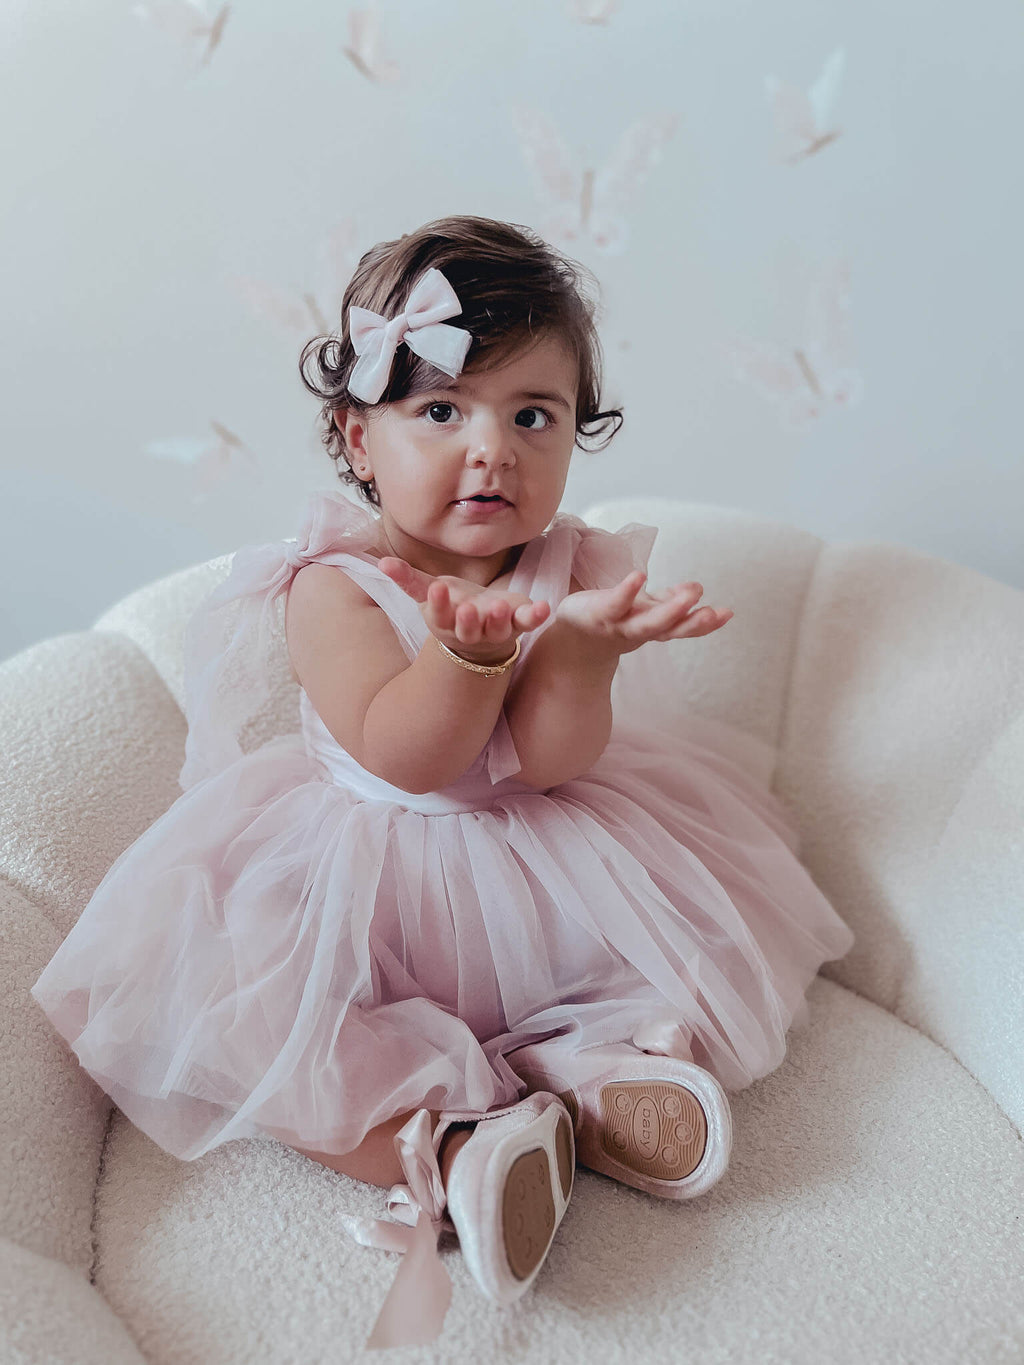 Harper baby flower girl romper in dusty pink is worn by a sleeping baby. She also wears a matching tulle bow clip in her hair.